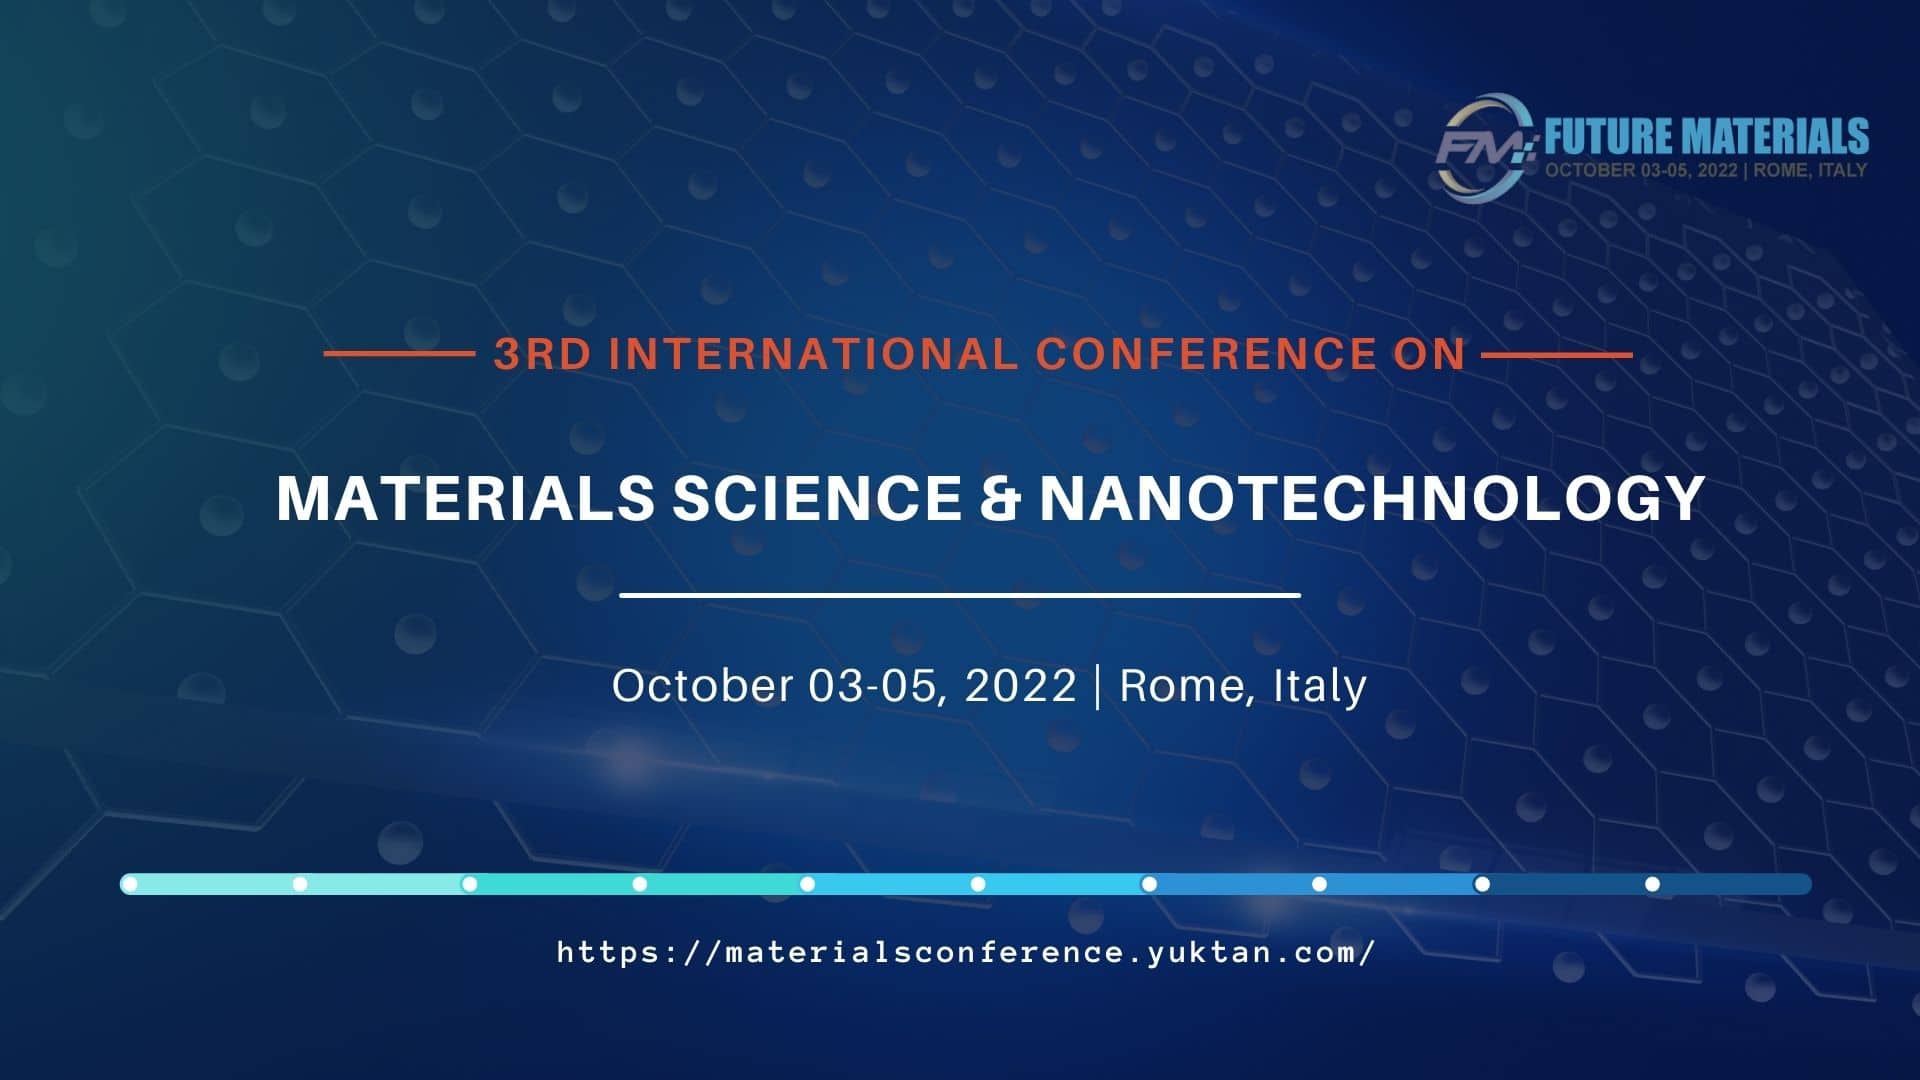 3rd International Conference on Materials Science & Nanotechnology